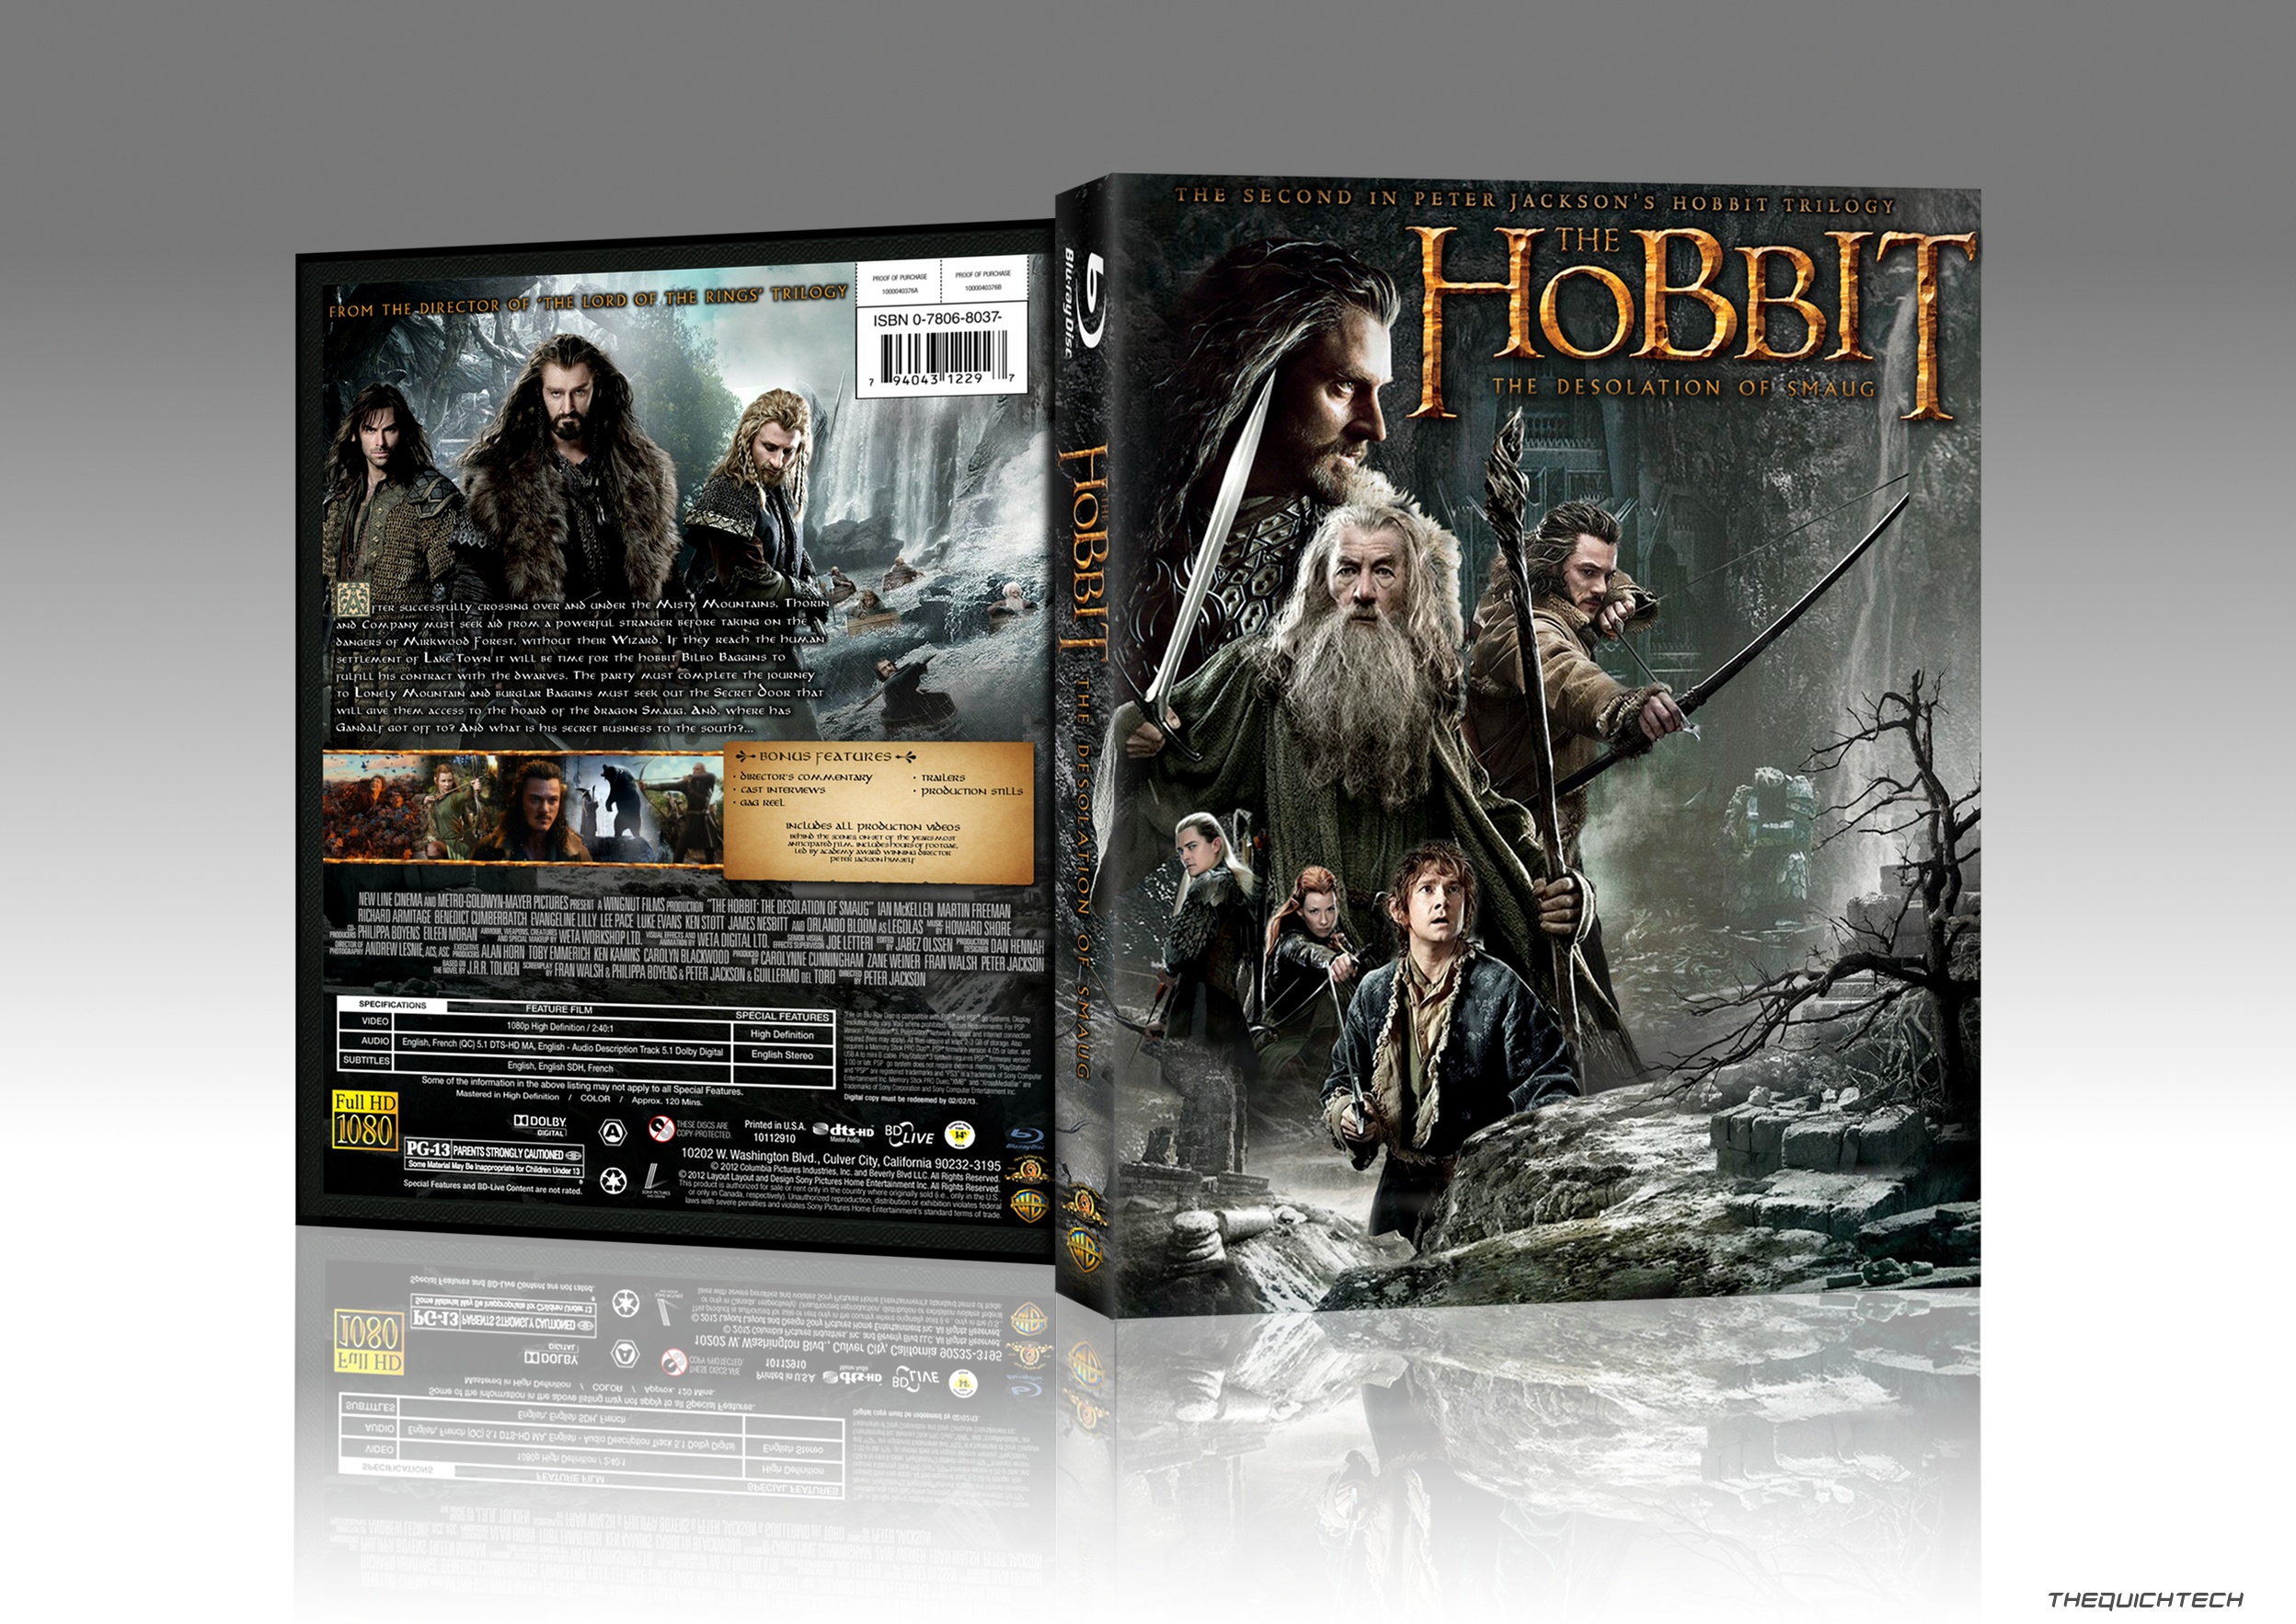 The Hobbit: The Desolation of Smaug box cover